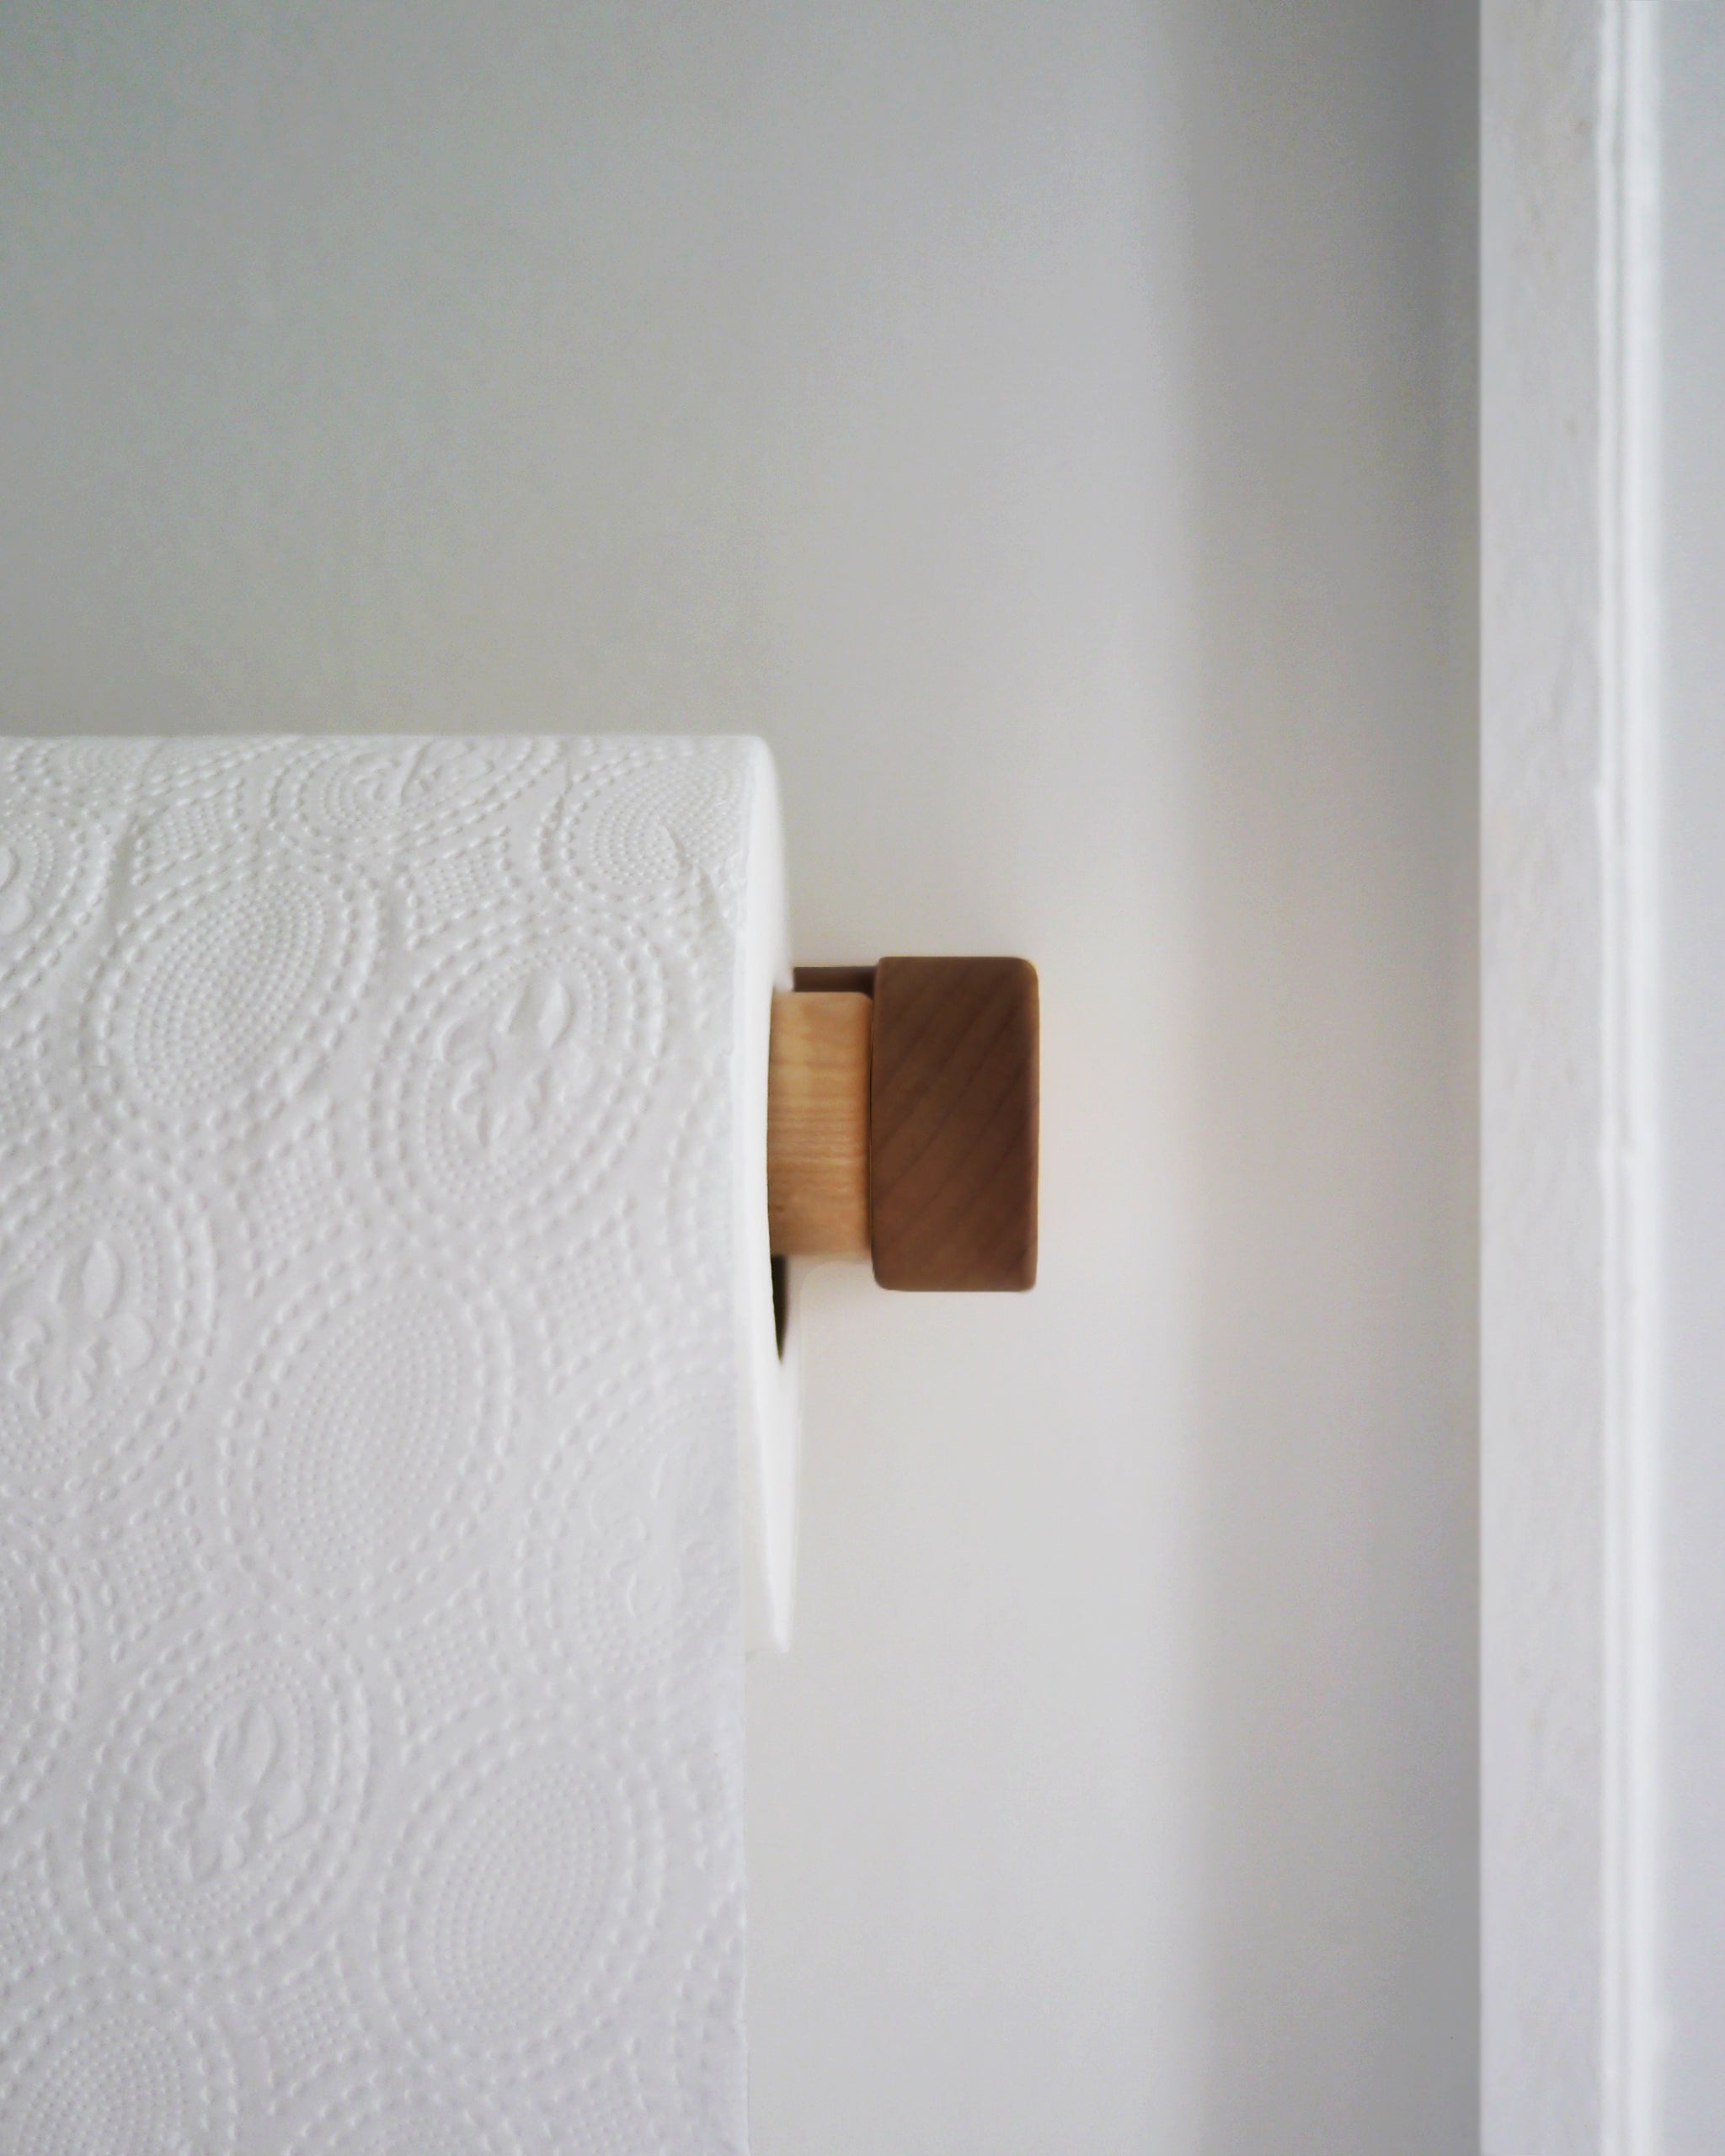 BAMBOO TOILET ROLL HOLDER WOODEN FREE STANDING AND TISSUE PAPER